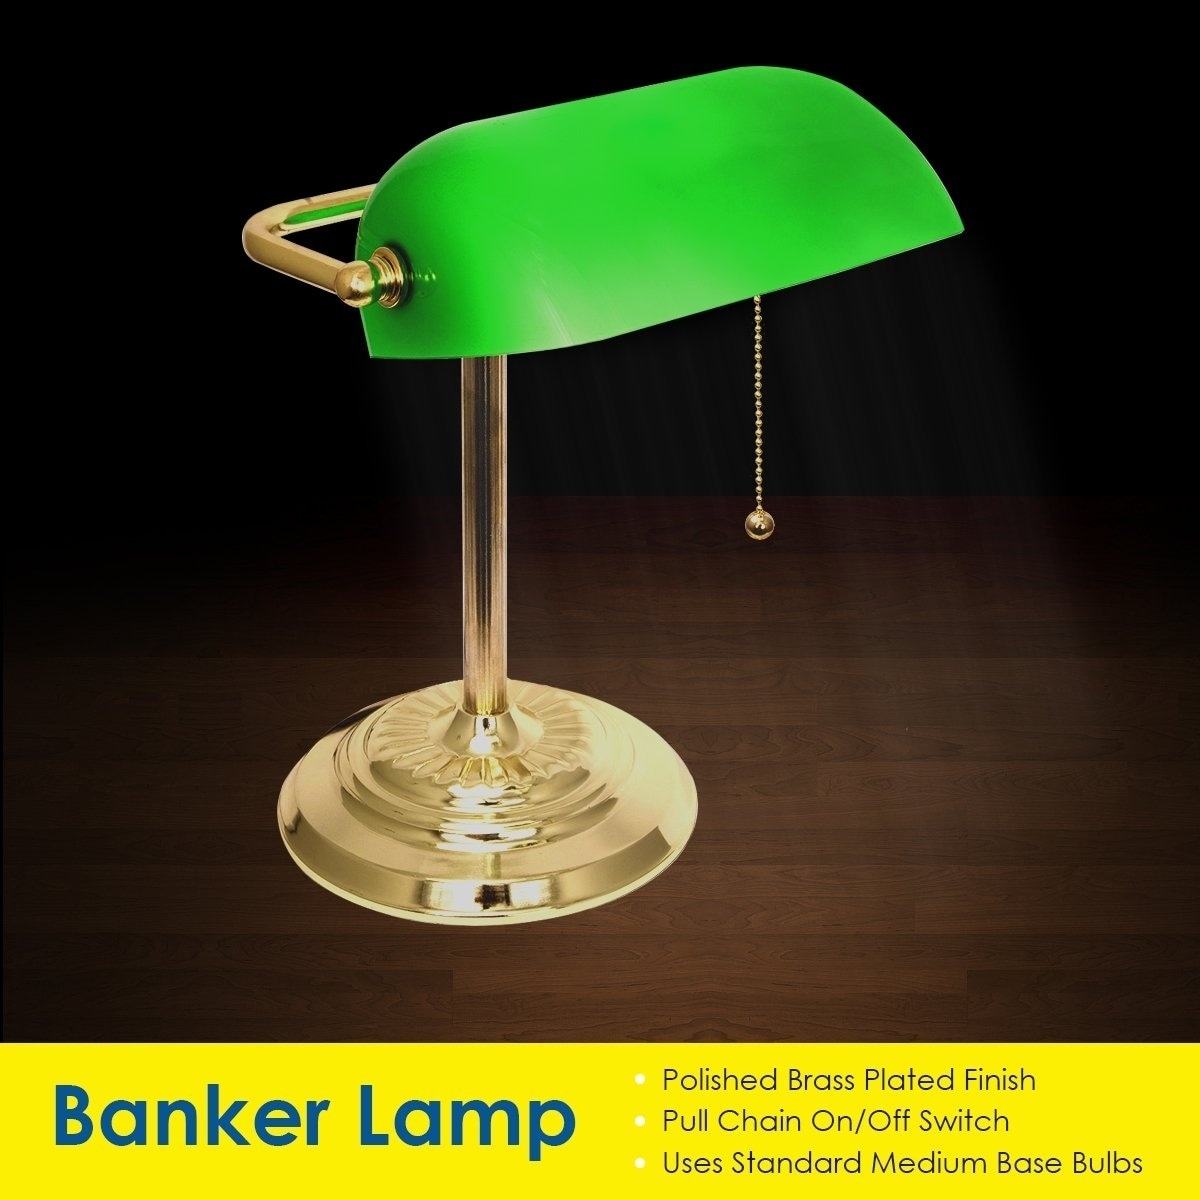 Bankers Lamp with Green Glass Shade and Brass Finish